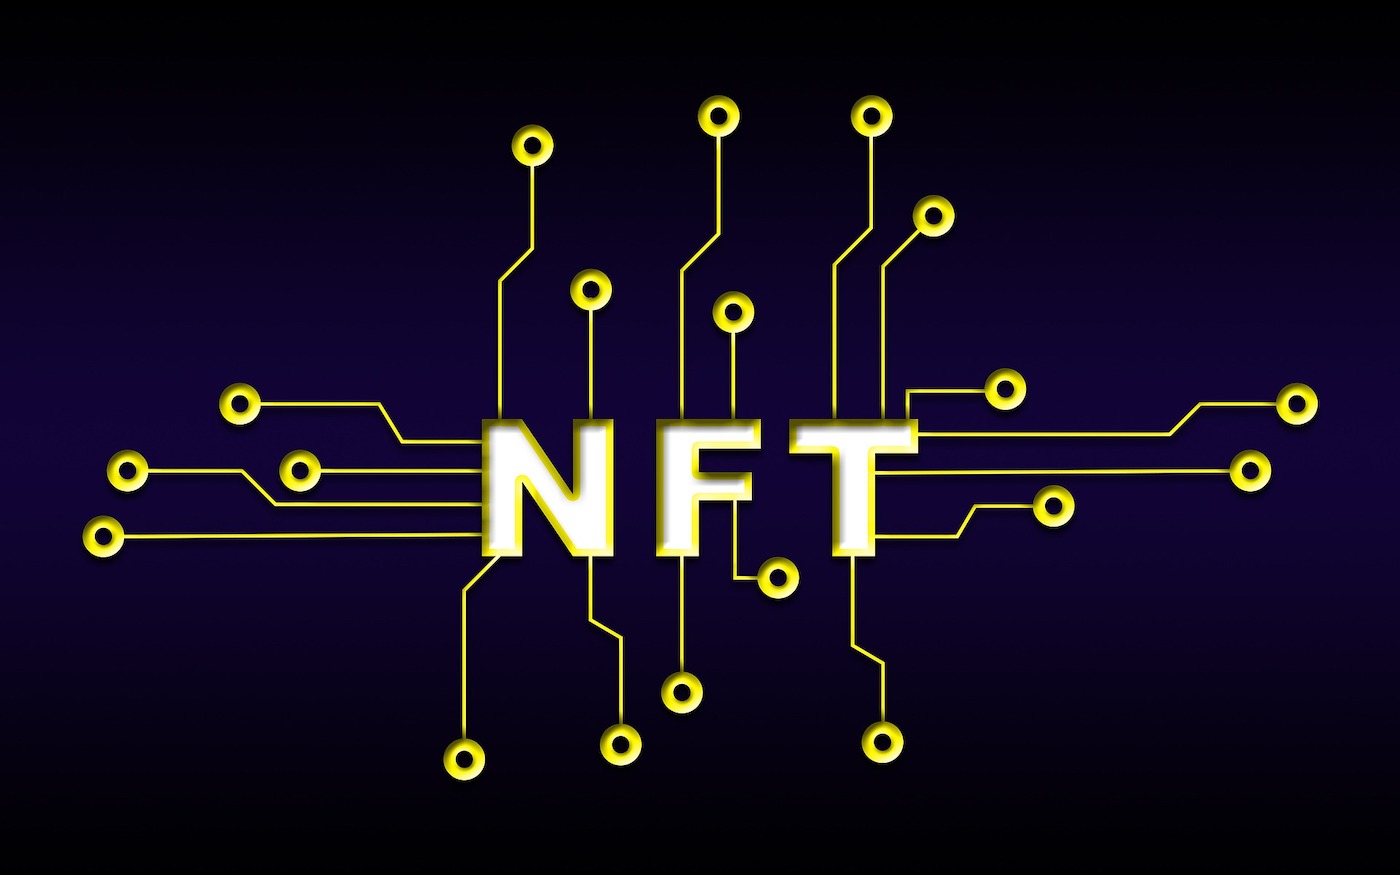 How to earn passive income from nfts